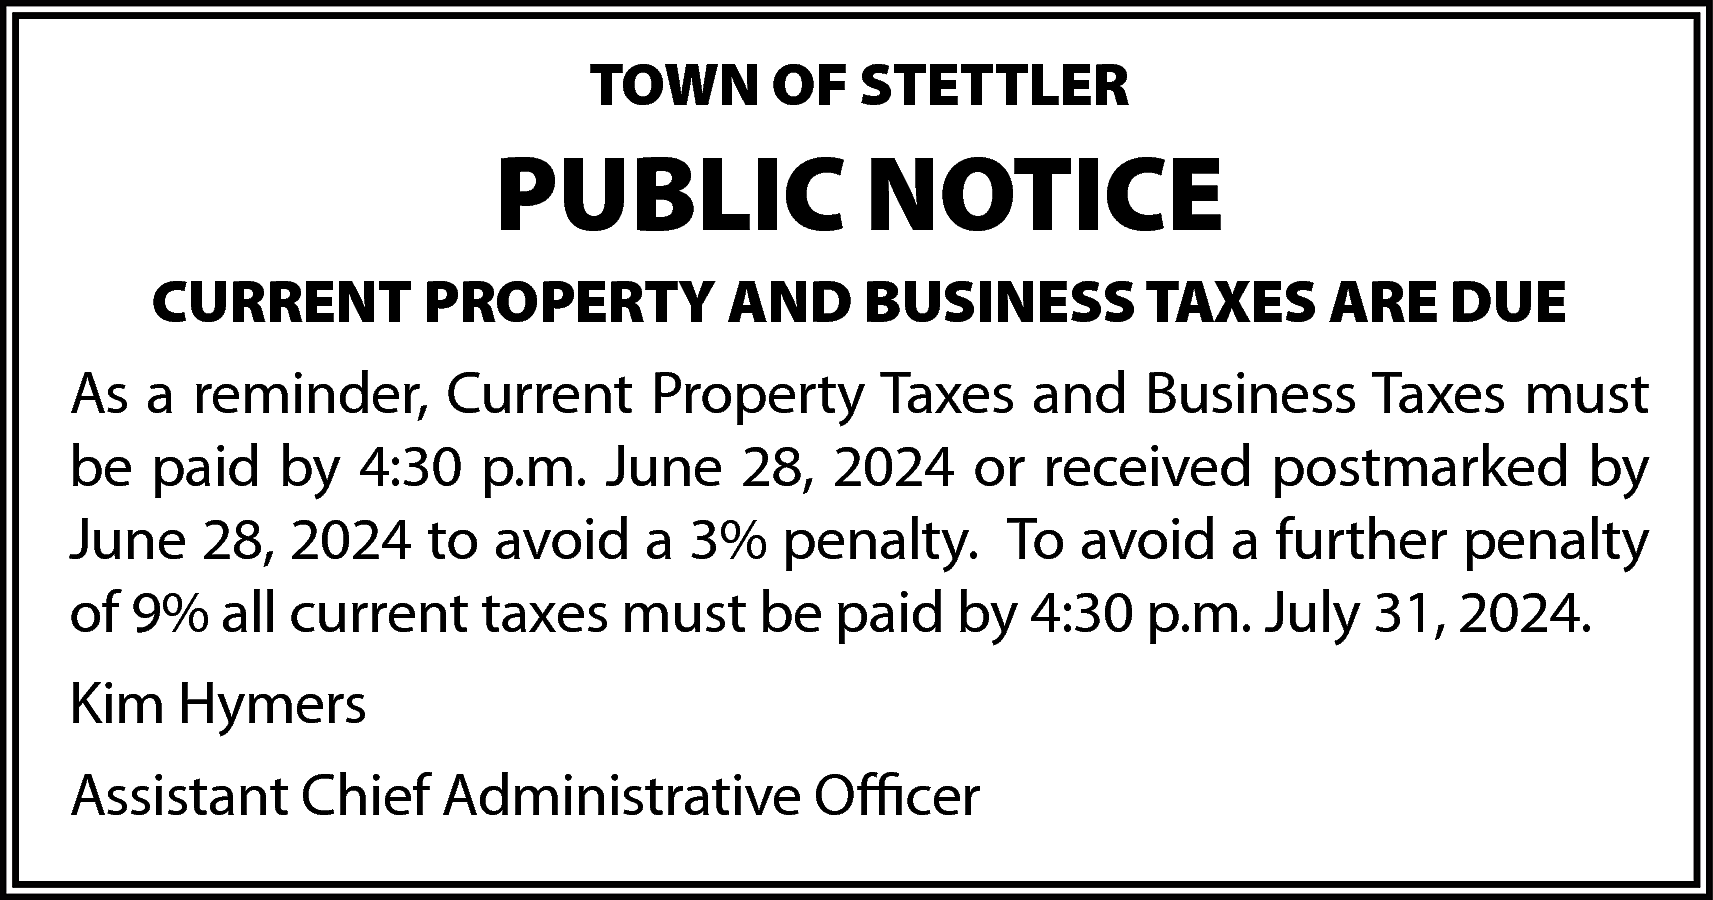 TOWN OF STETTLER <br> <br>PUBLIC  TOWN OF STETTLER    PUBLIC NOTICE  CURRENT PROPERTY AND BUSINESS TAXES ARE DUE  As a reminder, Current Property Taxes and Business Taxes must  be paid by 4:30 p.m. June 28, 2024 or received postmarked by  June 28, 2024 to avoid a 3% penalty. To avoid a further penalty  of 9% all current taxes must be paid by 4:30 p.m. July 31, 2024.  Kim Hymers  Assistant Chief Administrative Officer    